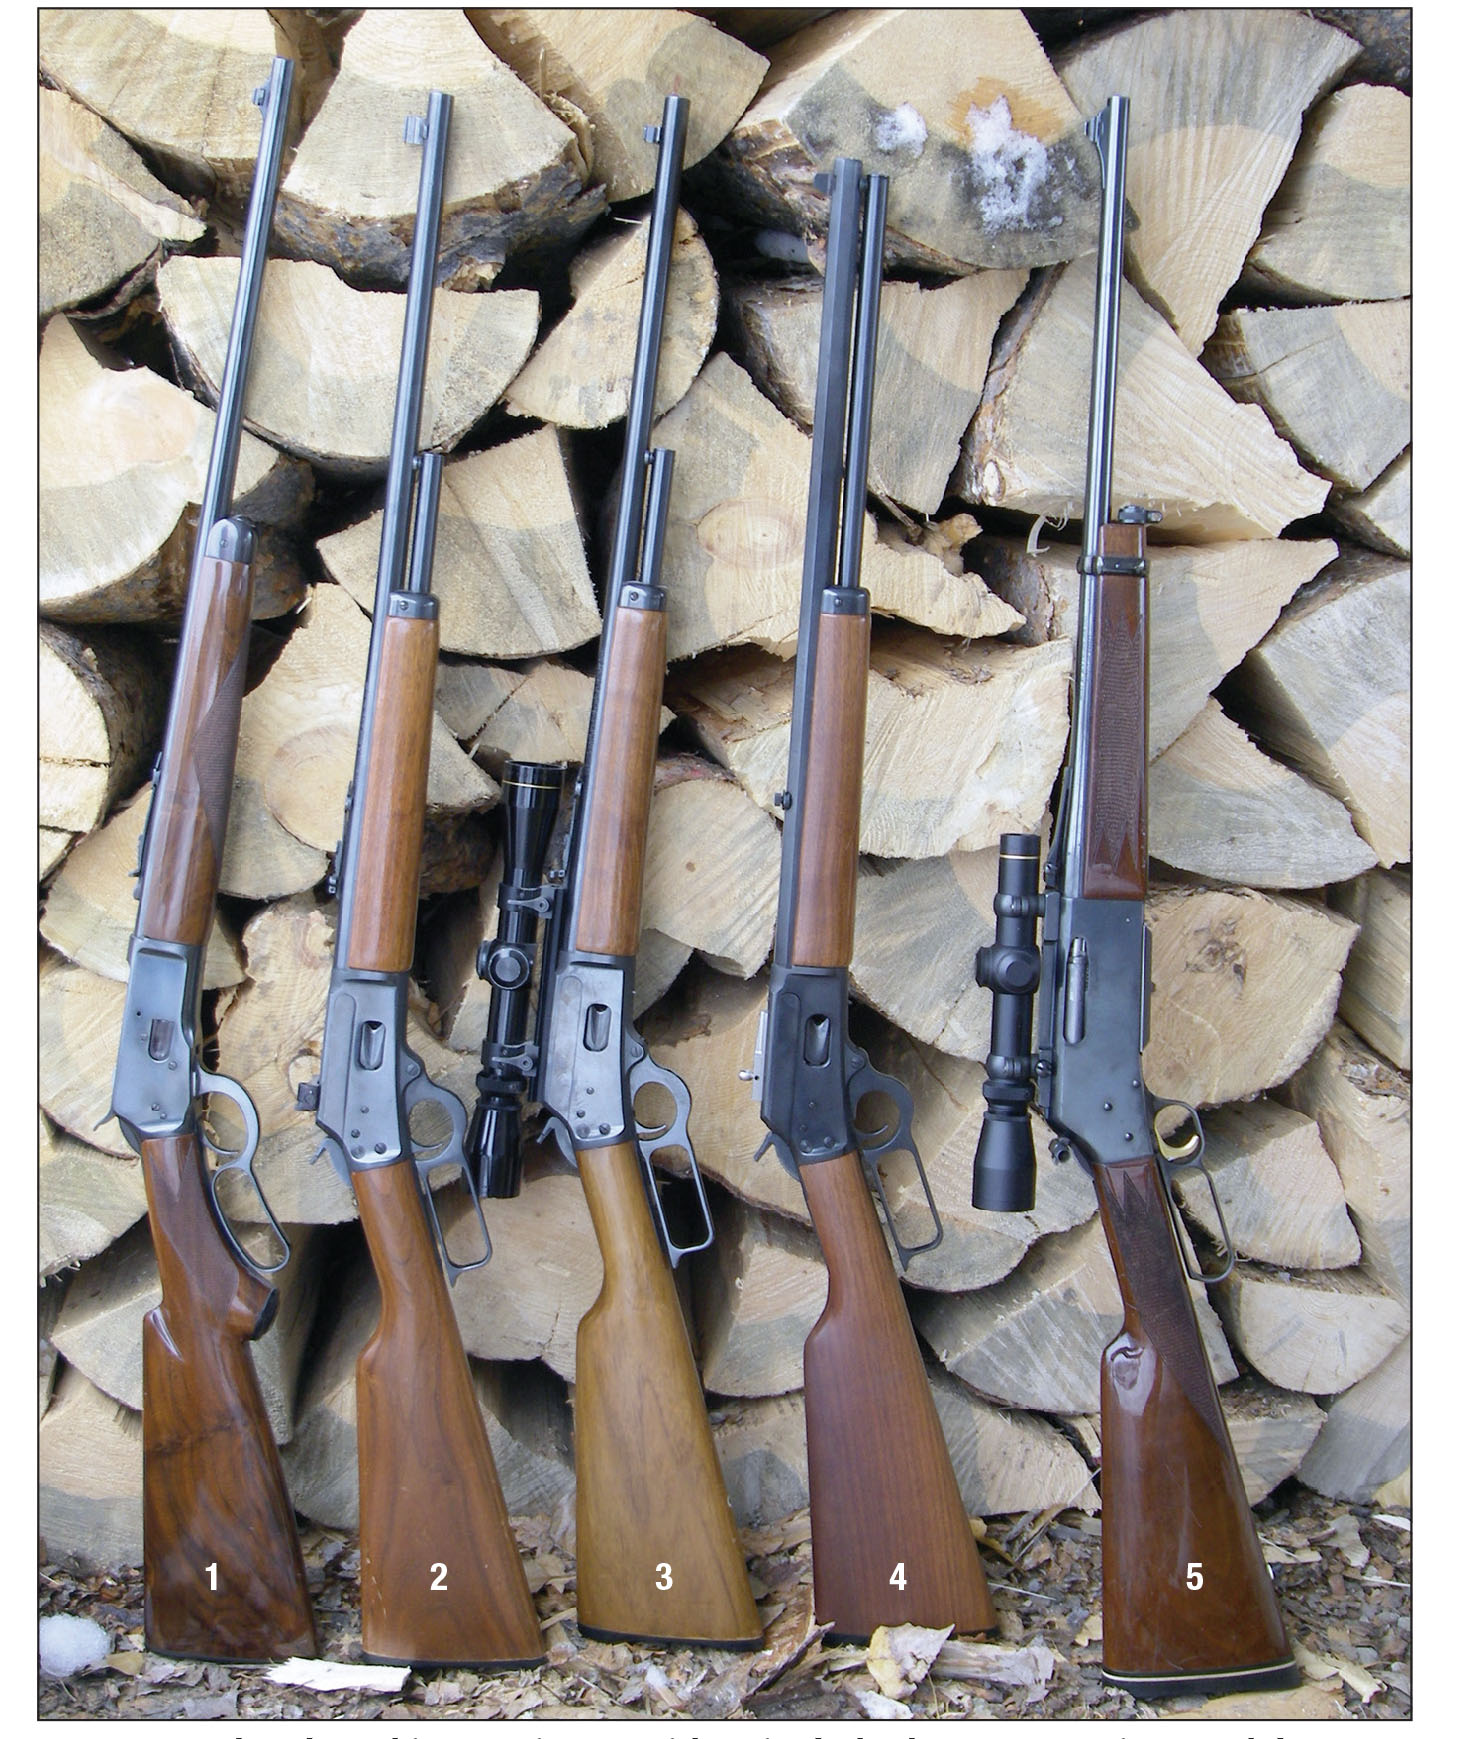 Leverguns chambered in varmint cartridges include the (1) Browning Model 53 .32-20 Winchester, (2) Marlin Model 1894CL .25-20 Winchester, (3) Marlin Model 1894CL .32-20 Winchester, (4) Marlin Model 1894CB Cowboy Carbine Limited .357 Magnum and (5) Browning BLR 81 .223 Remington.